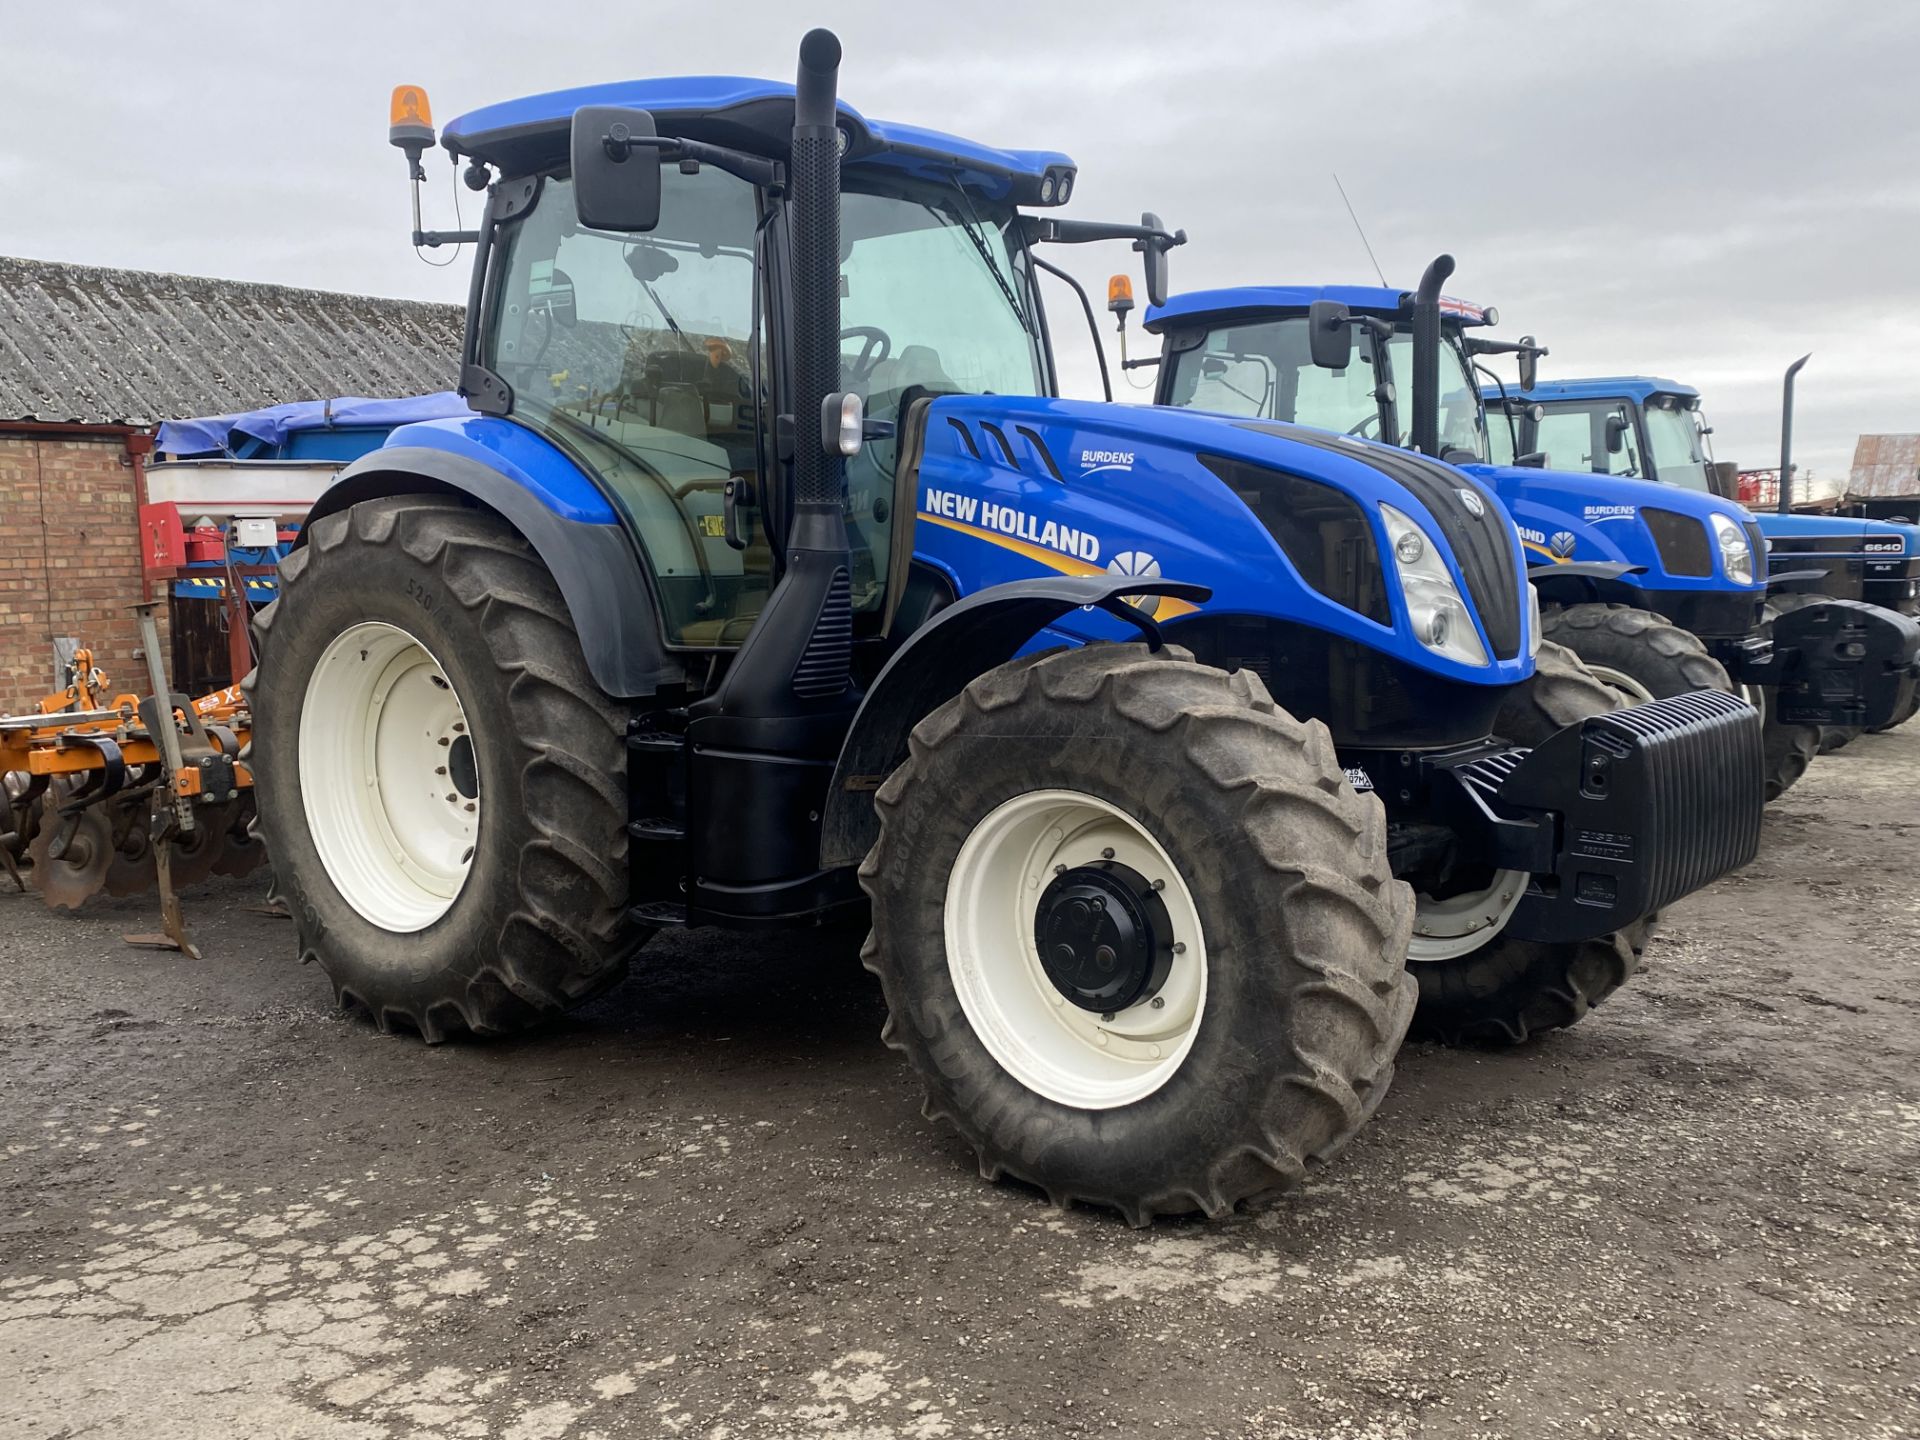 (17) New Holland T6 180 4wd tractor, 50k, Air Brakes, 6 cylinder, 150 hp, 2,900 hrs, Air Con, sold - Image 2 of 3